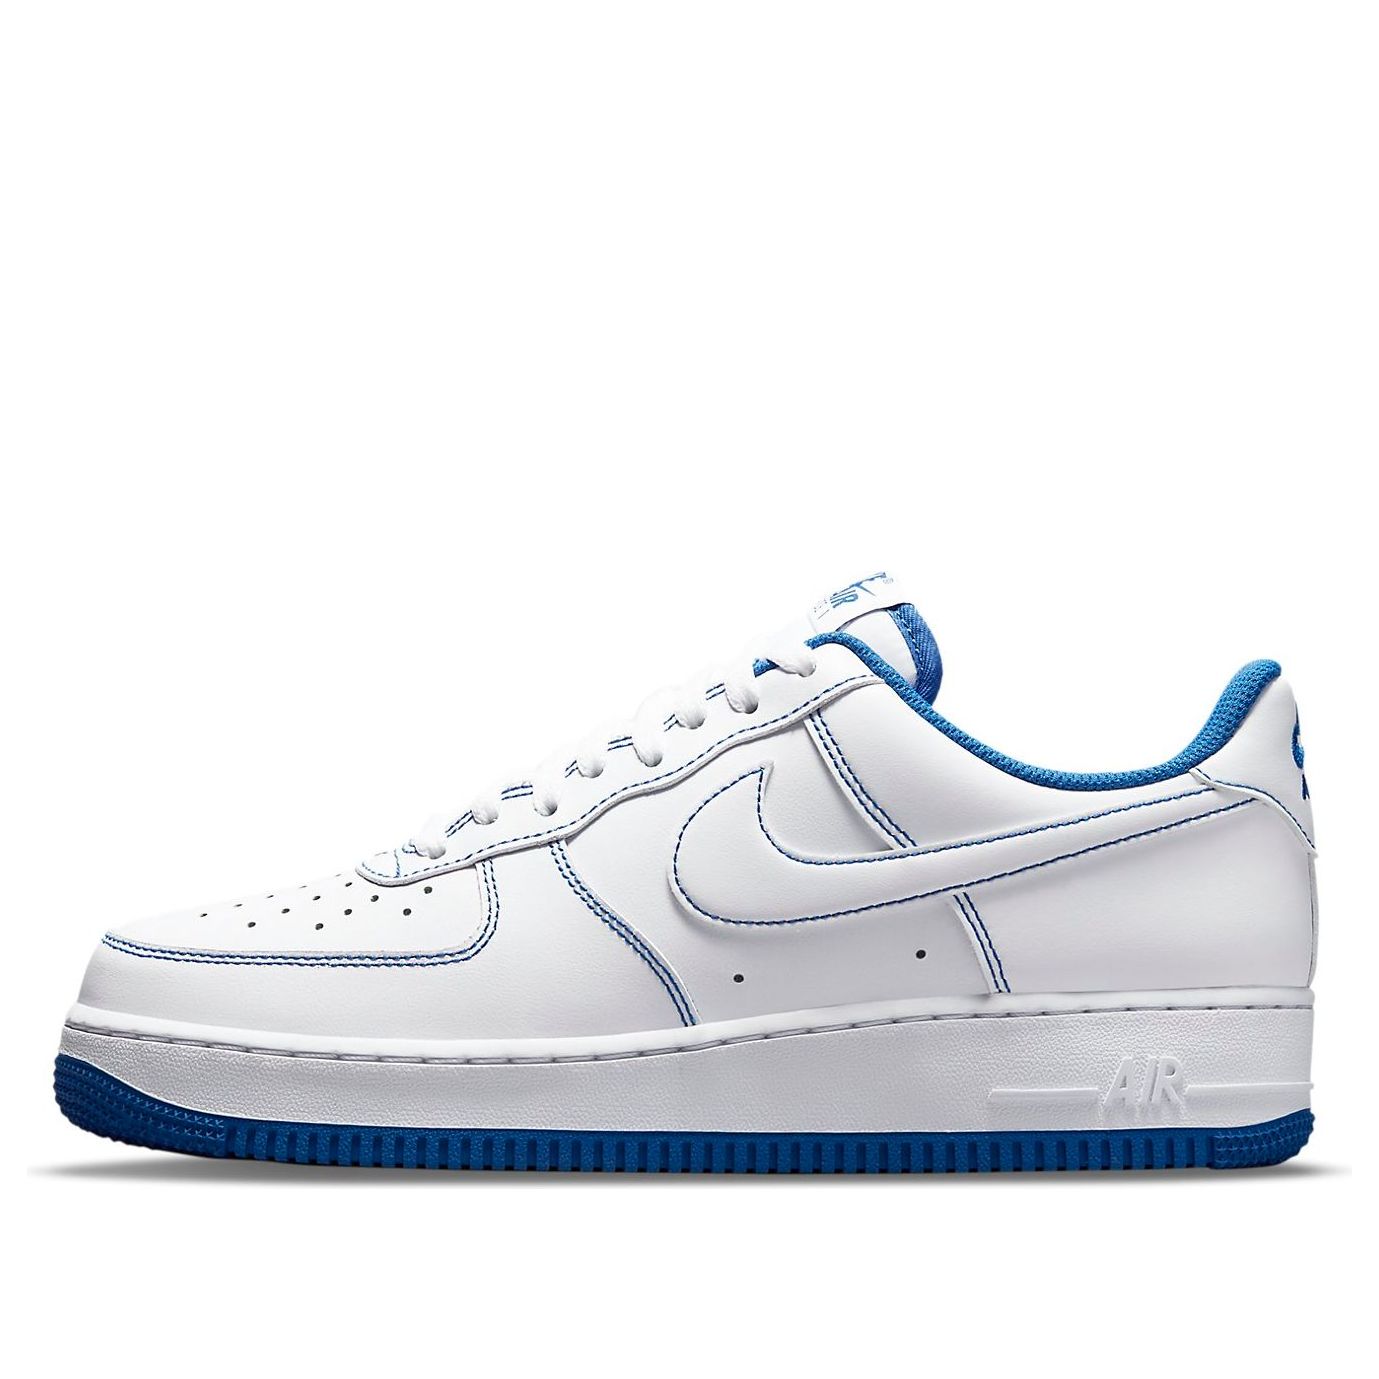 Nike Air Force 1 '07 'Contrast Stitch - White Game Royal' CV1724-101